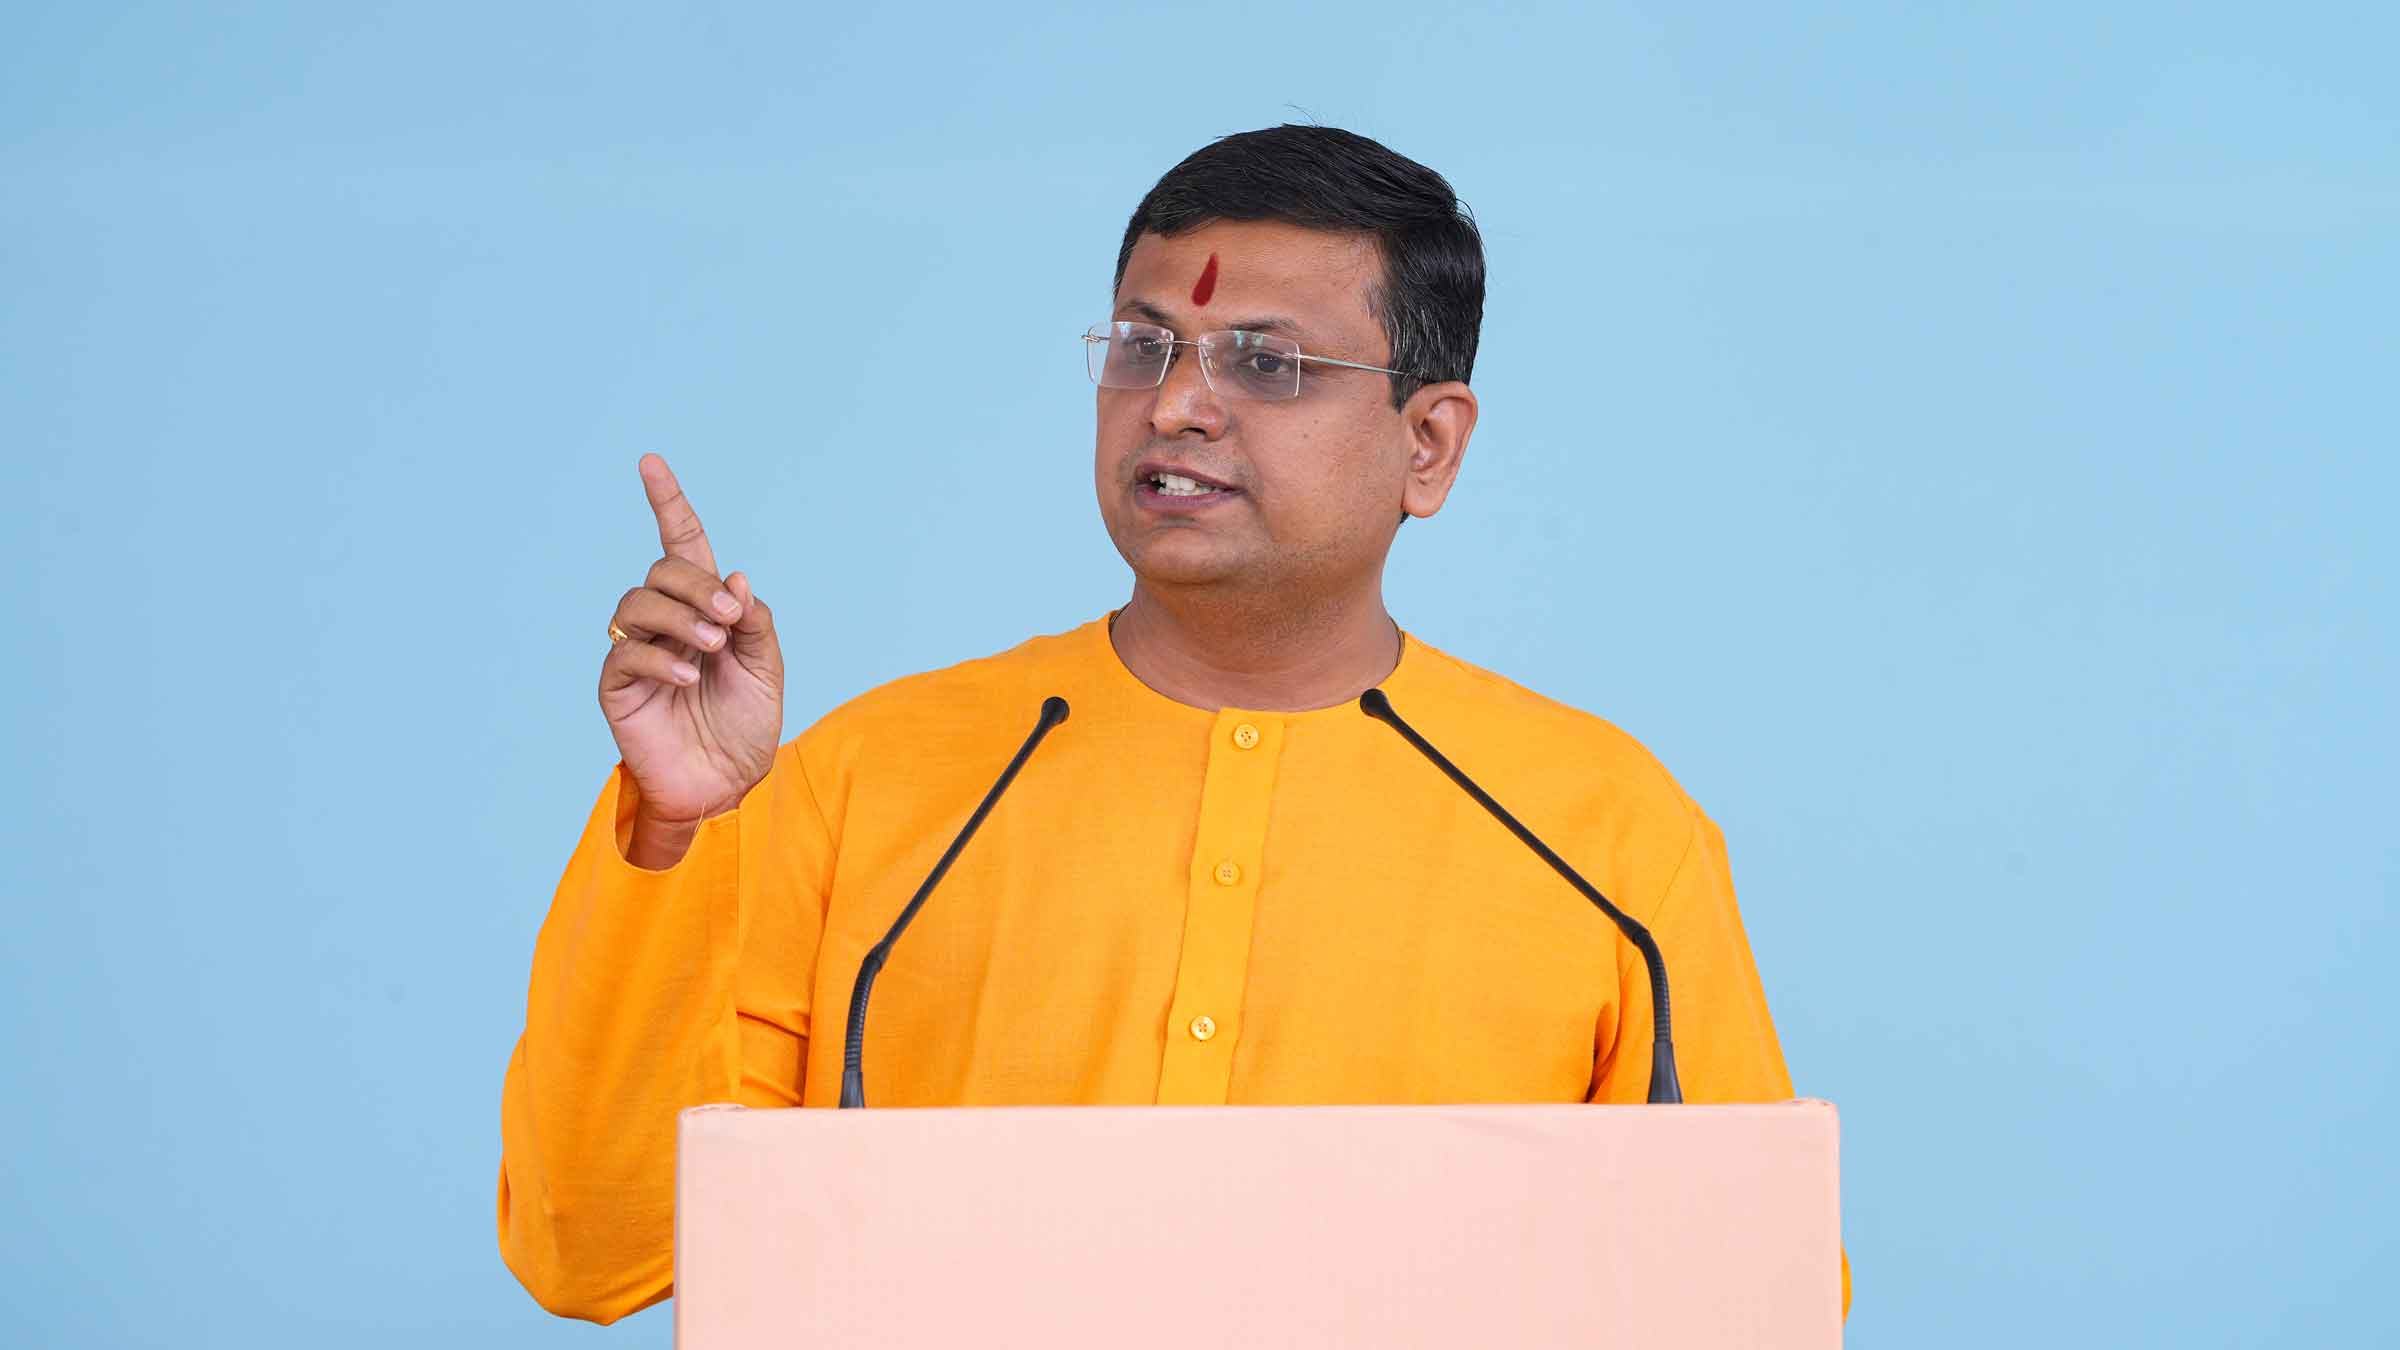 Mr Chetan Rajhans (National Spokesperson, Sanatan Sanstha) presenting his views on - Dharma, Secularism and Constitution. He said, “India needs to be declared a ‘Hindu Rashtra’ constitutionally''.